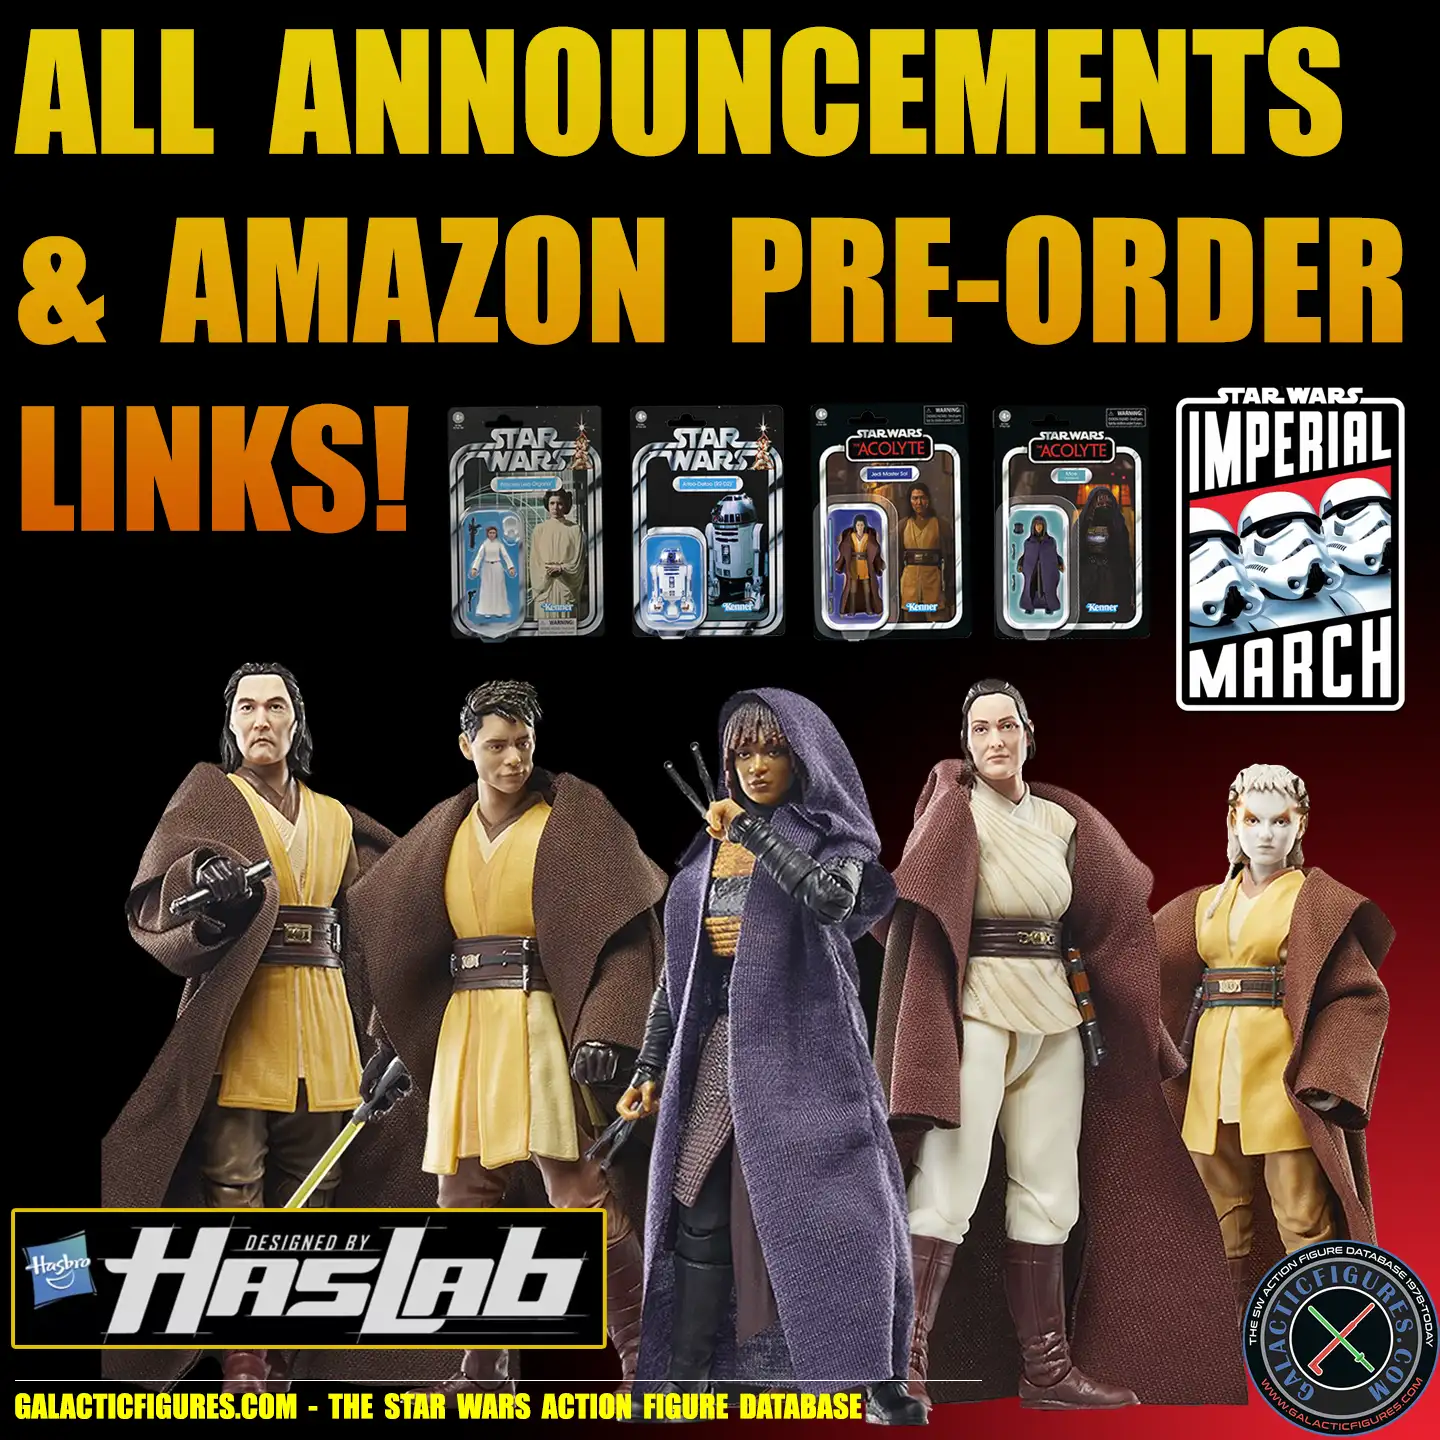 All Announcements & Amazon Pre-Order Links!